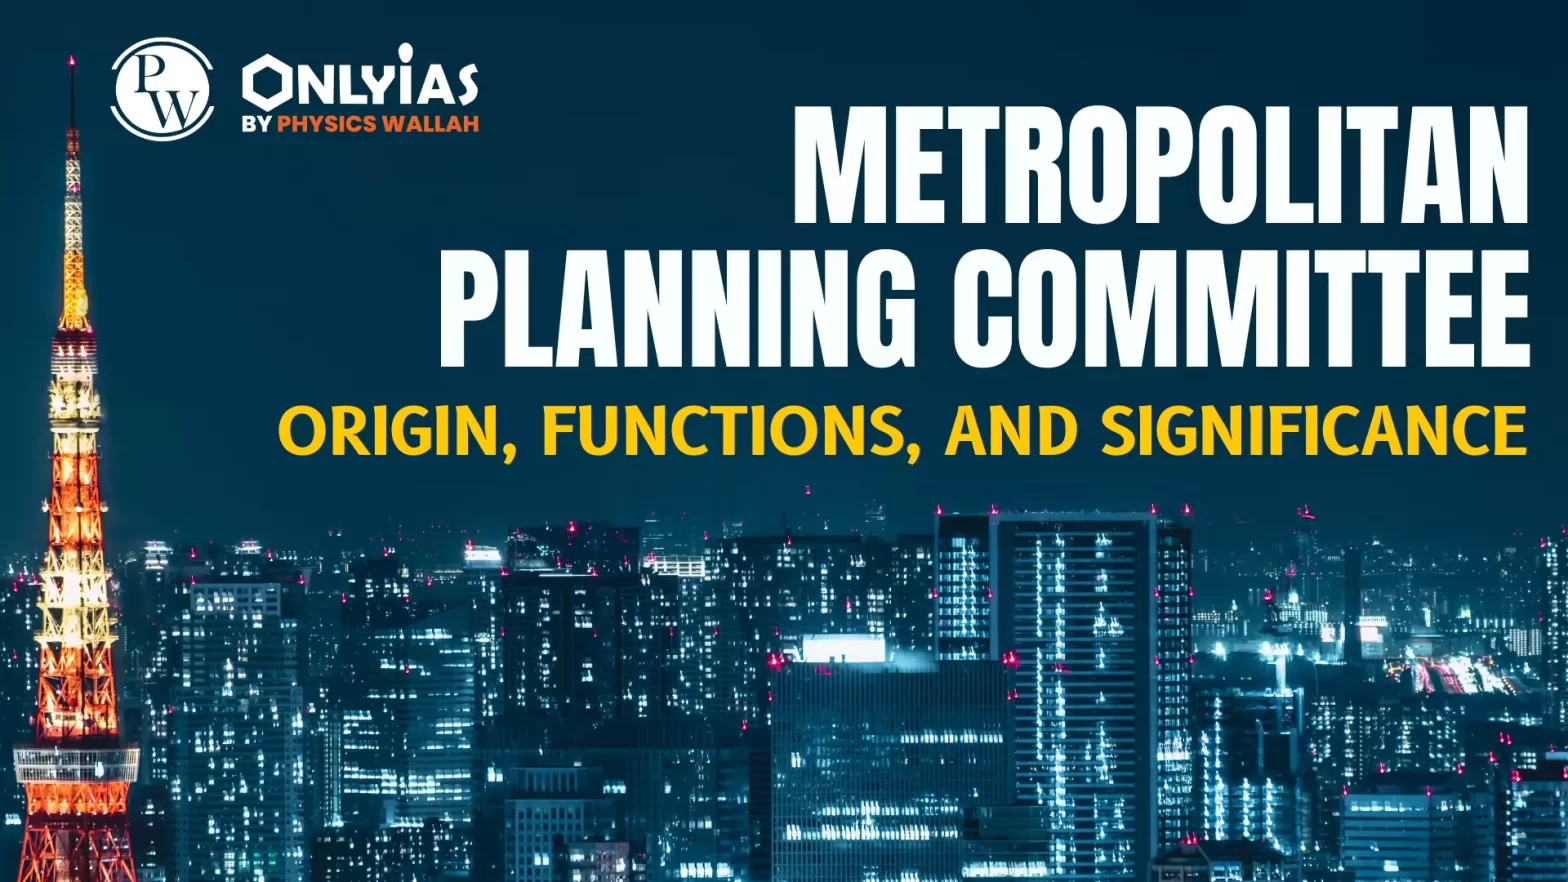 Metropolitan Planning Committee: Origin, Functions, and Significance